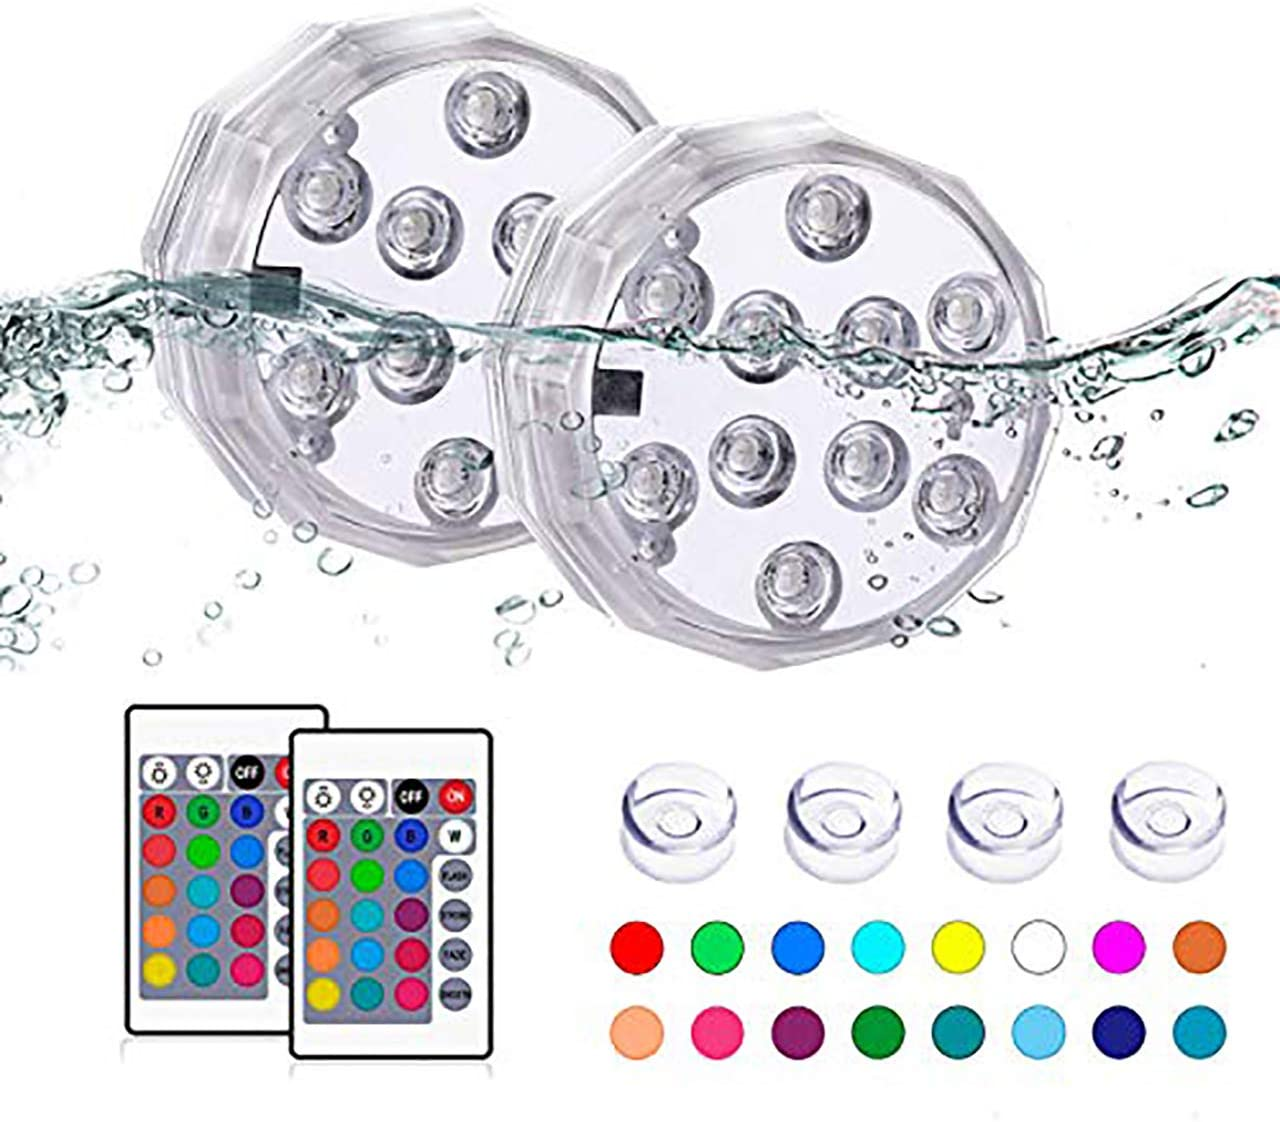 Submersible LED Lights with Remote